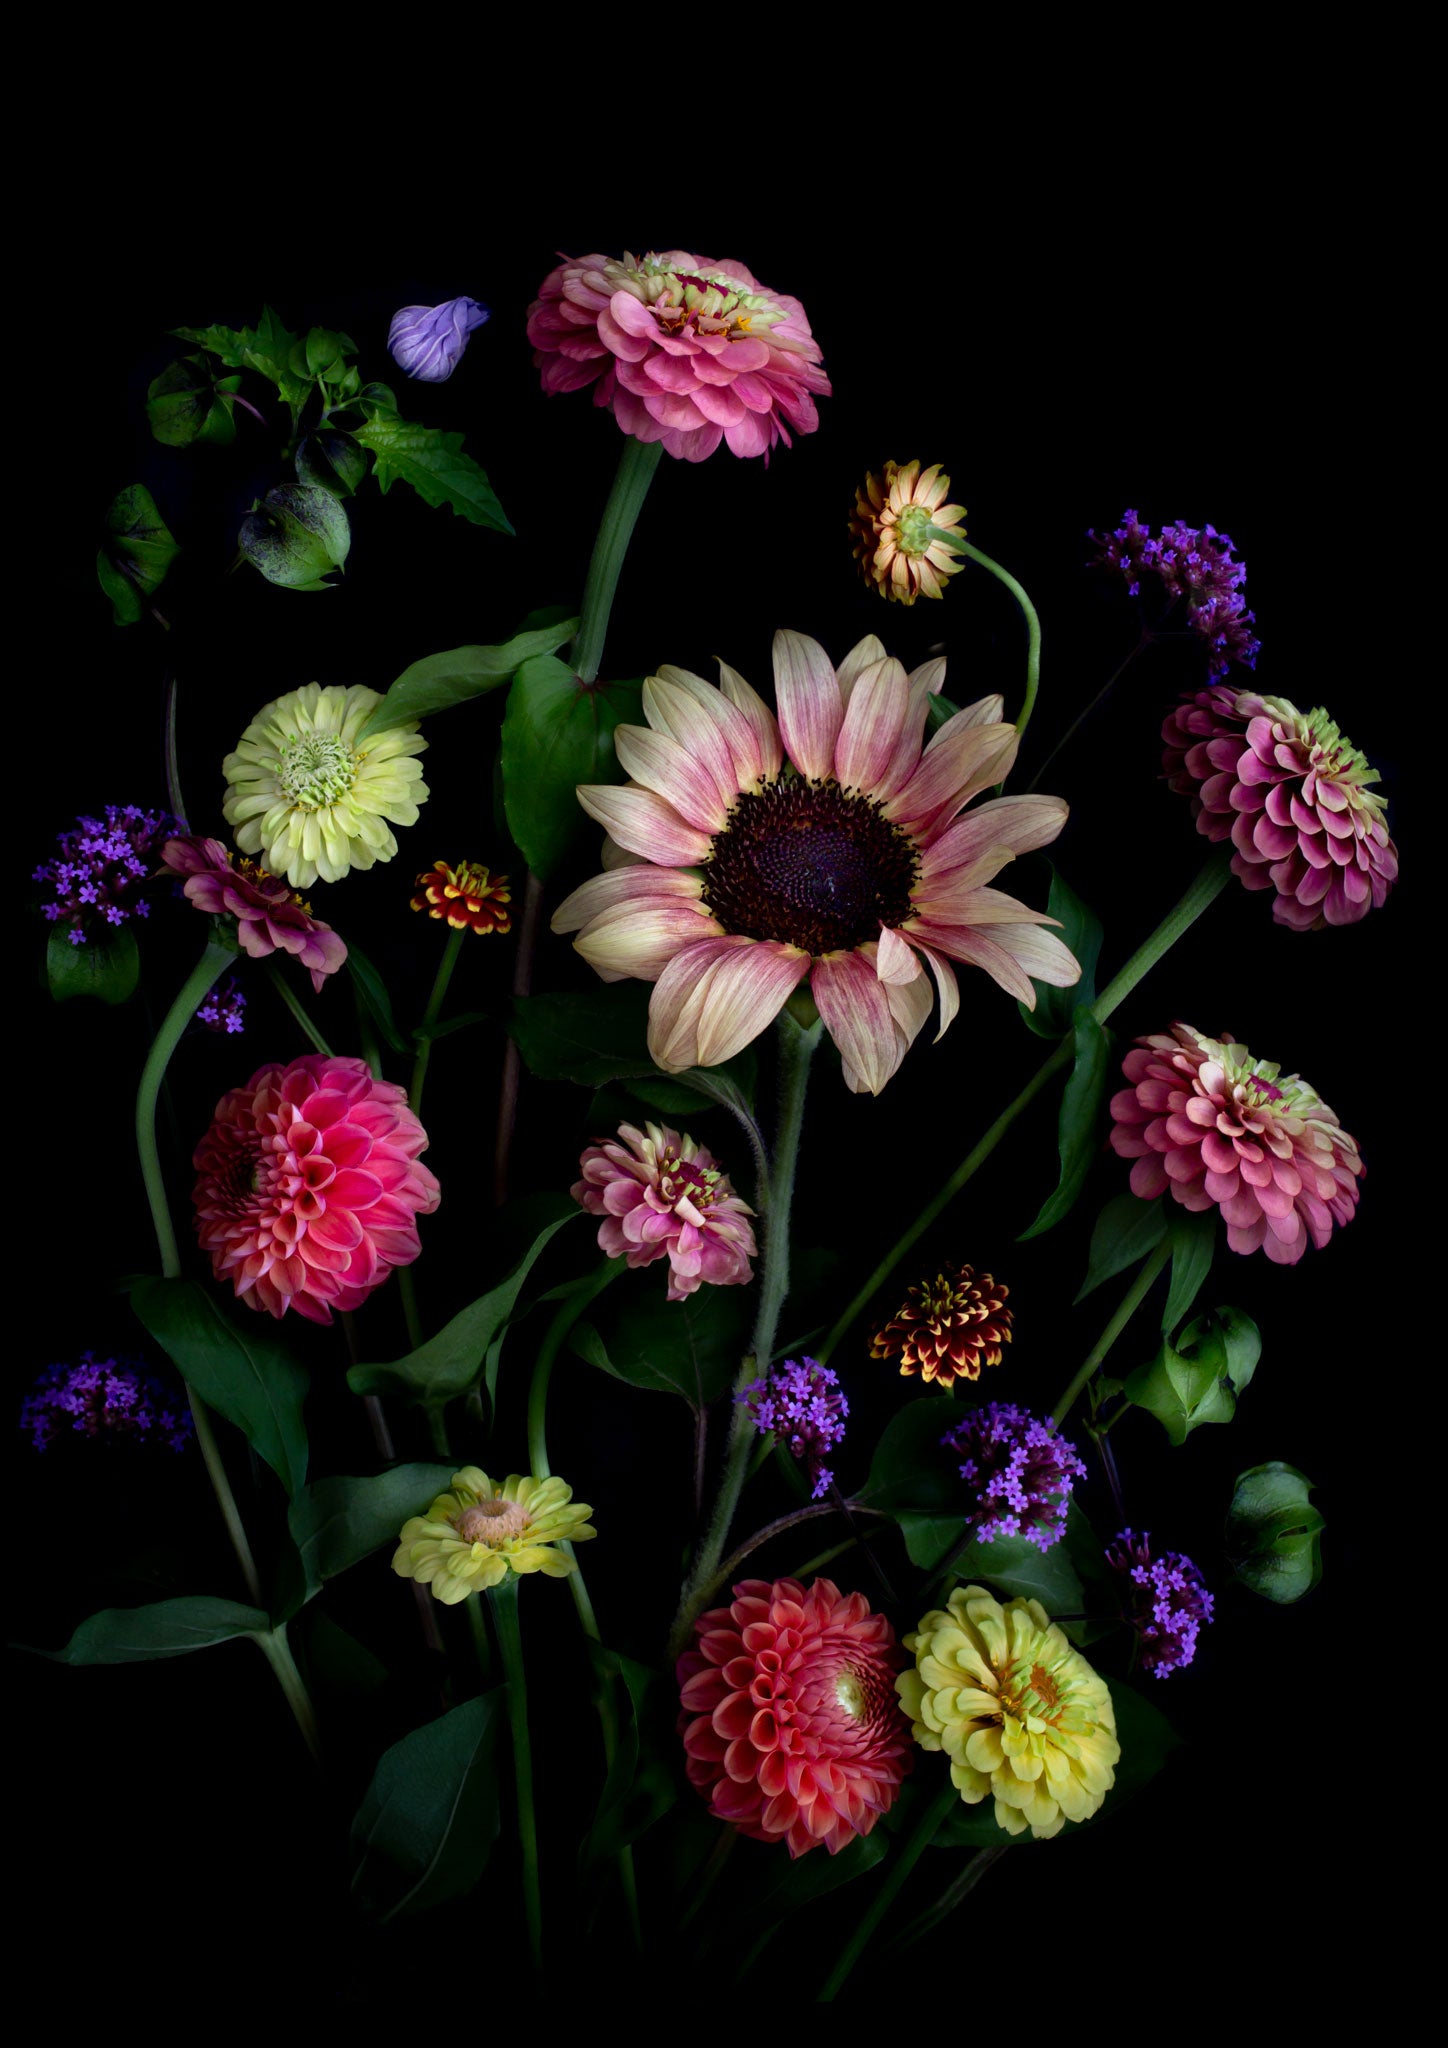 A botanical print featuring a Sunflower with Zinnias, Dahlias, Verbena and a touch of the Shoo Fly plant, Nicandra physalodes., photographed on a black background.